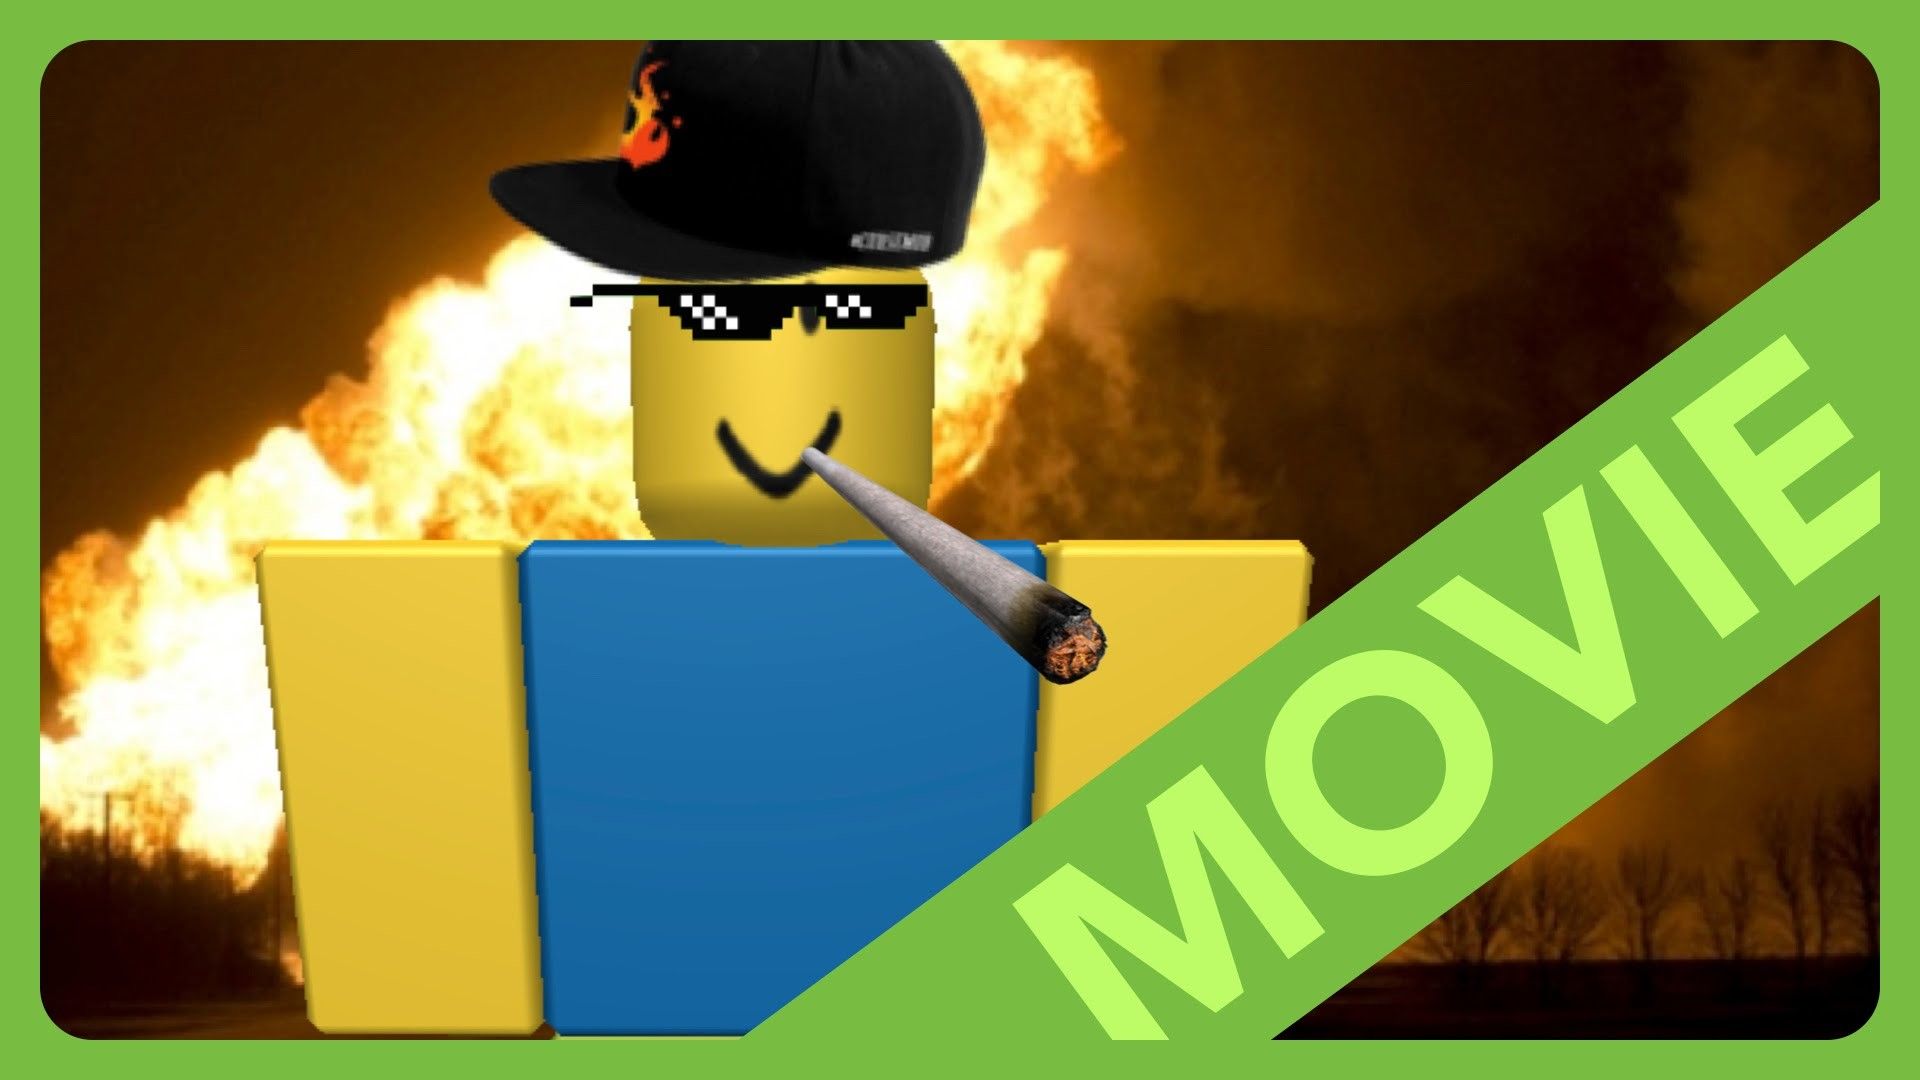 roblox sign in with facebook